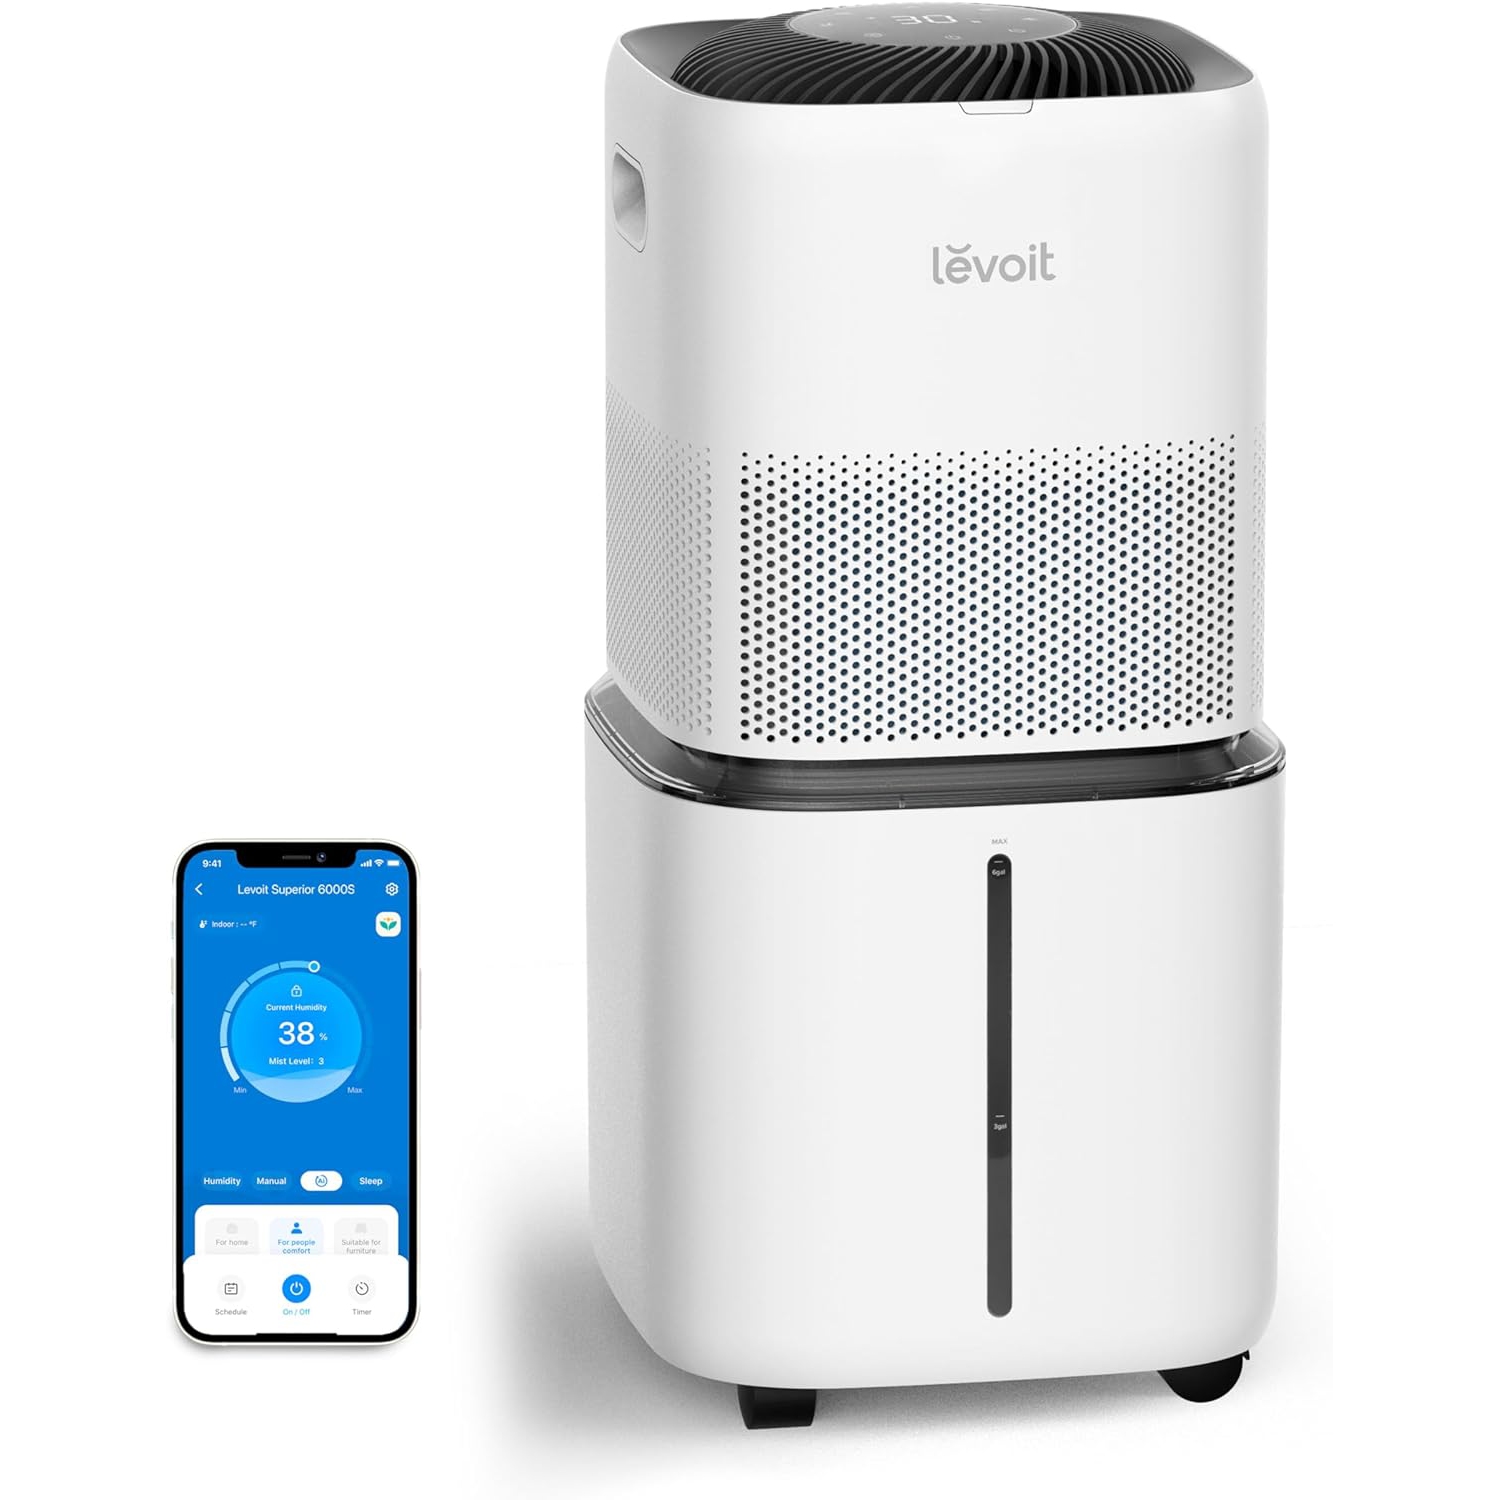 LEVOIT Smart Evaporative Humidifier for Large Room and Home Whole House up to 3000ft², 6 Gal, Last 72-Hour, Premium Filter, Dry Mode, Water Fill Hose & Foldable Storage